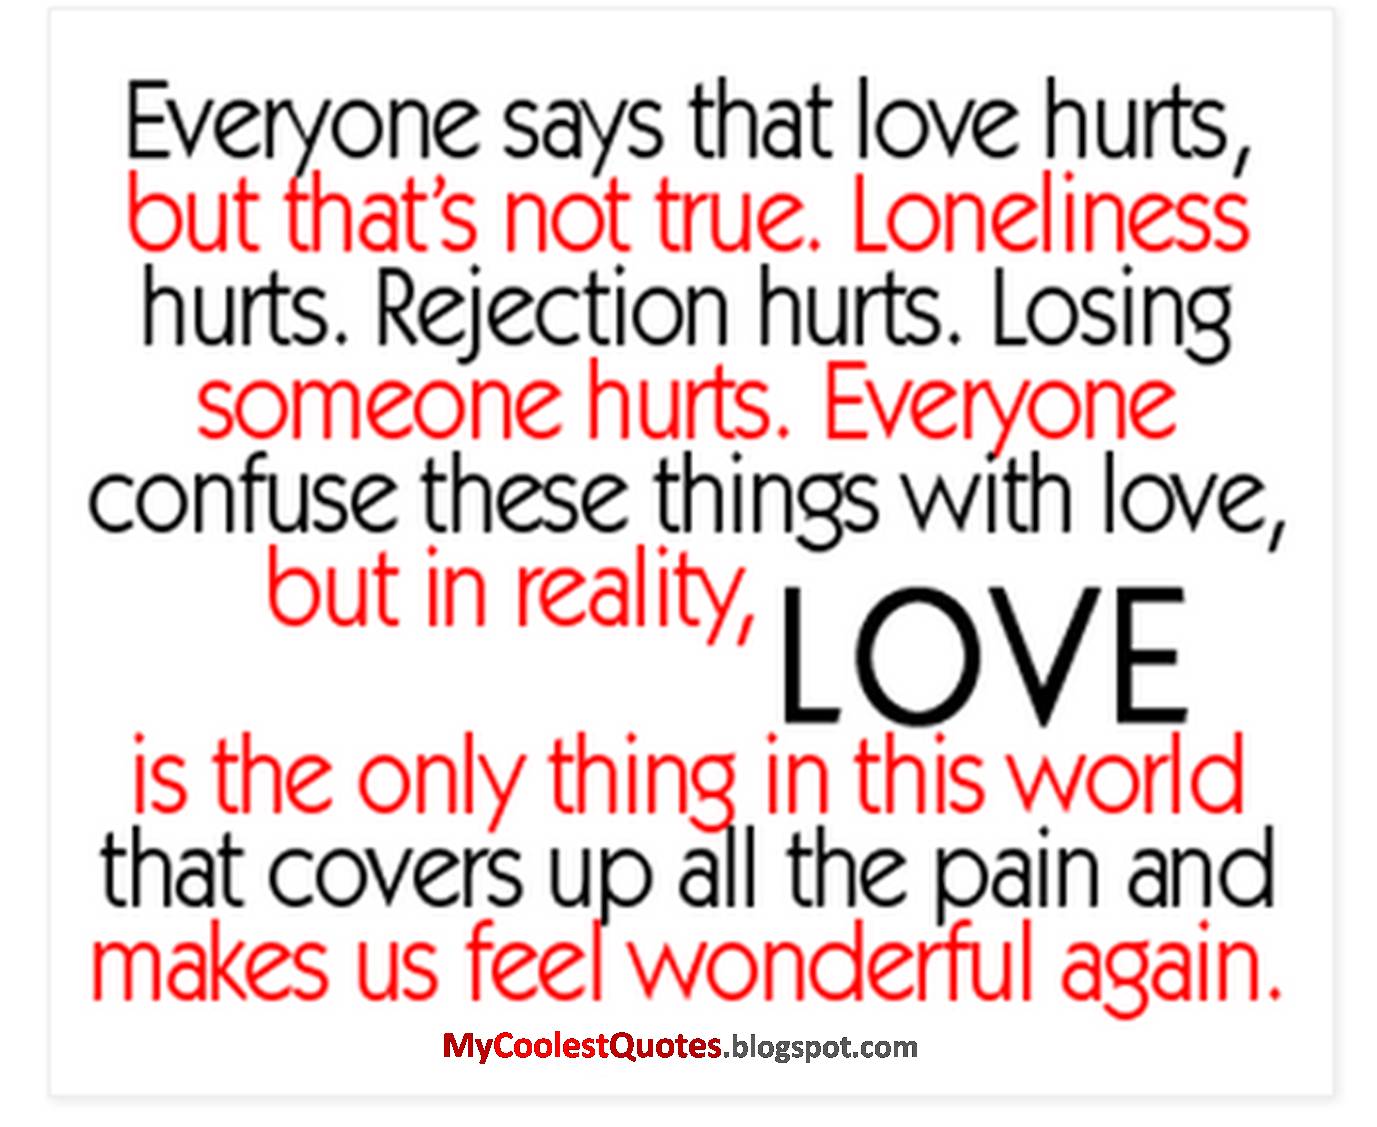 My Coolest Quotes Does Love Really Hurt